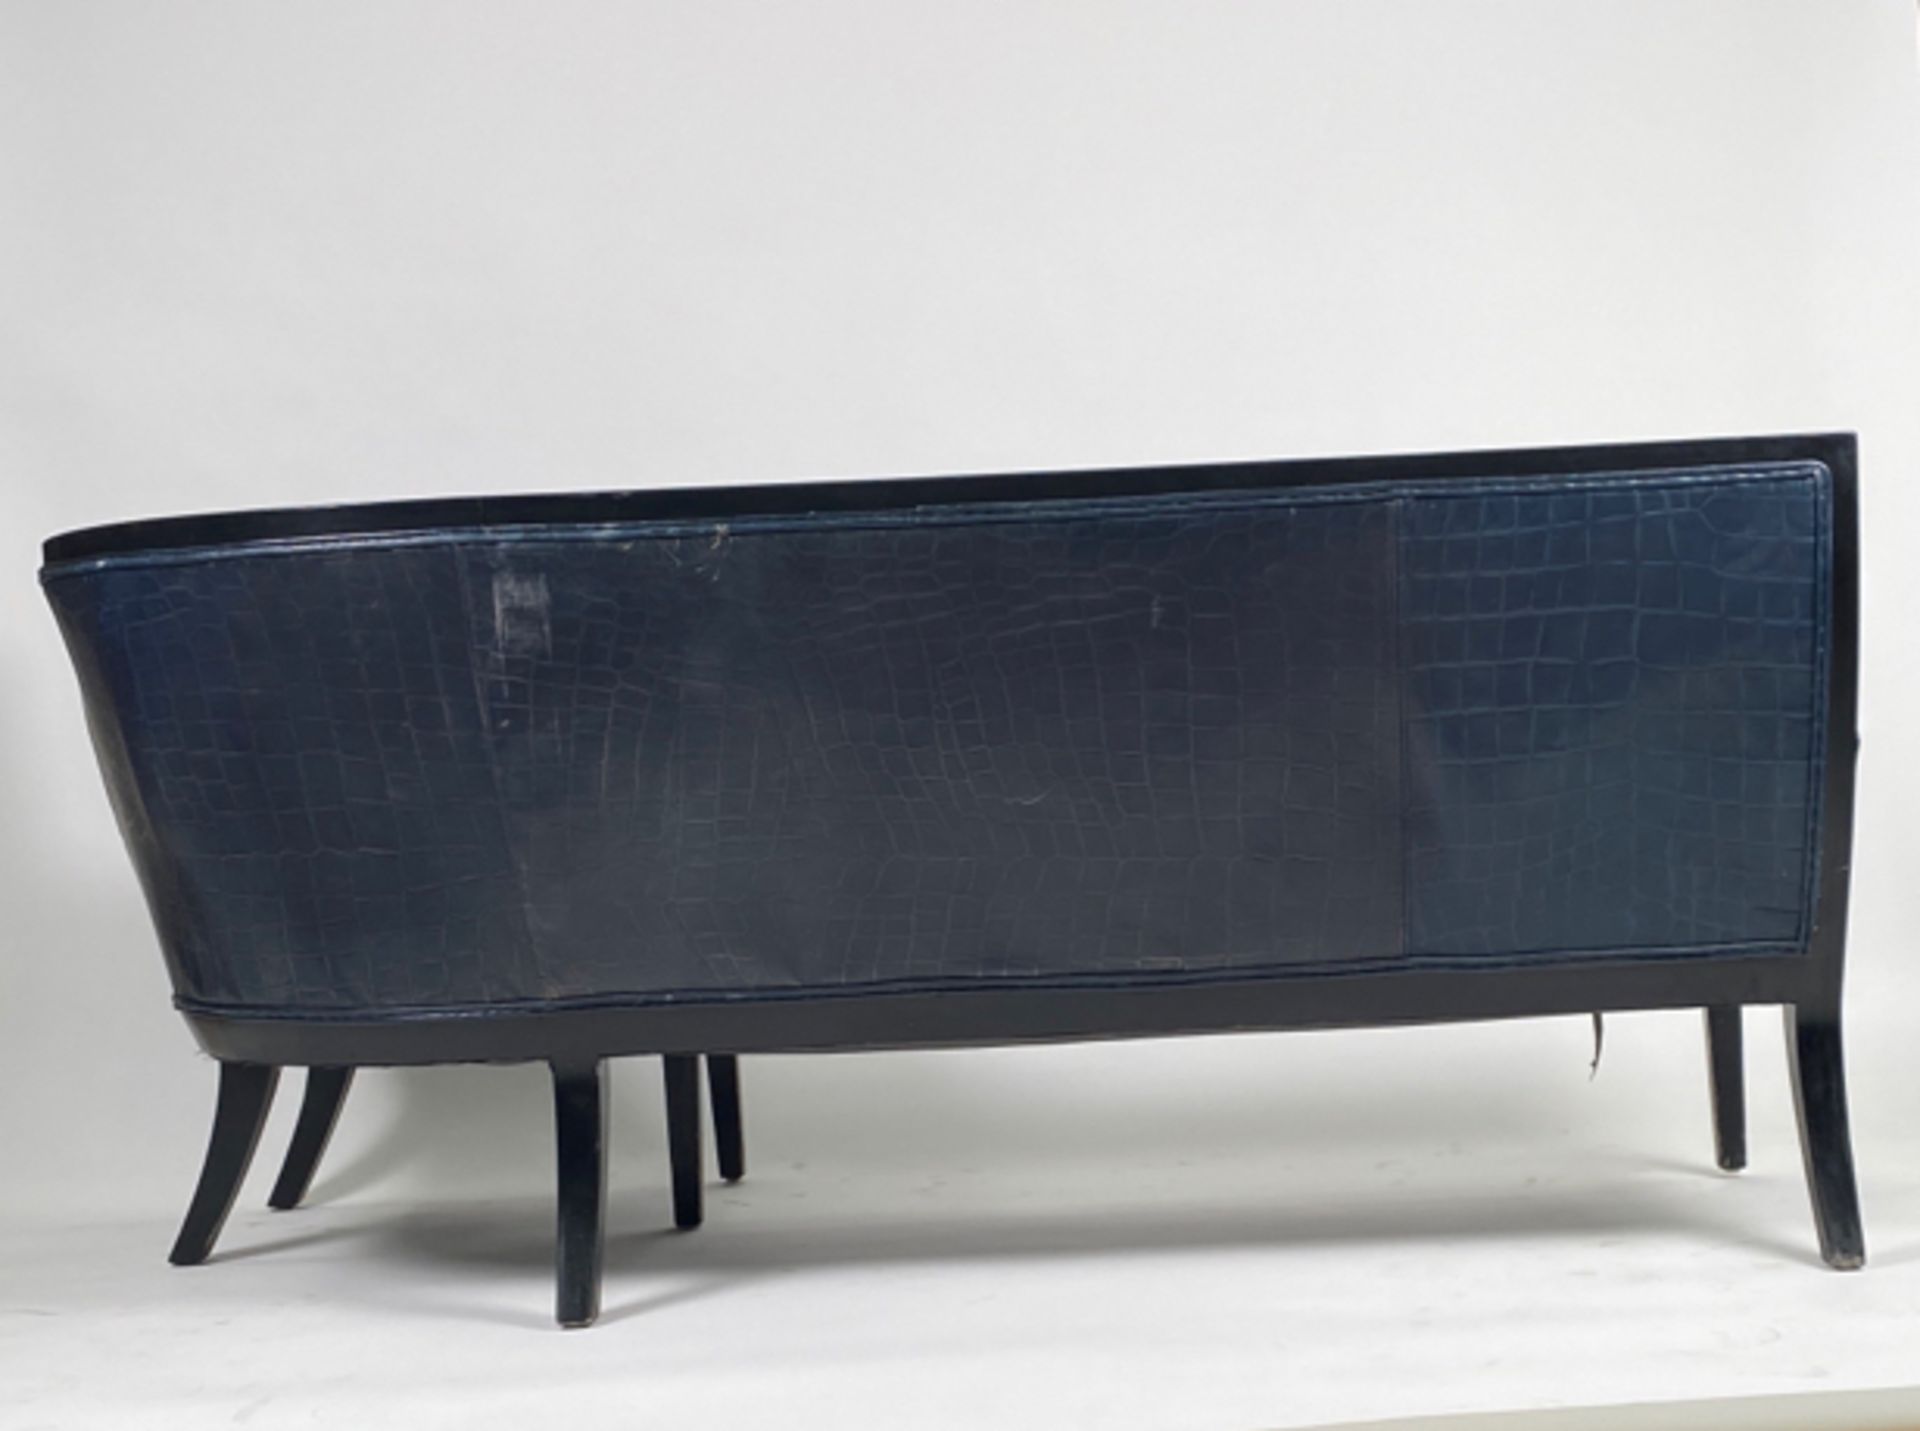 Iconic Berkeley Blue Bar Corner Sofa Commissioned by David Collins - Image 7 of 7